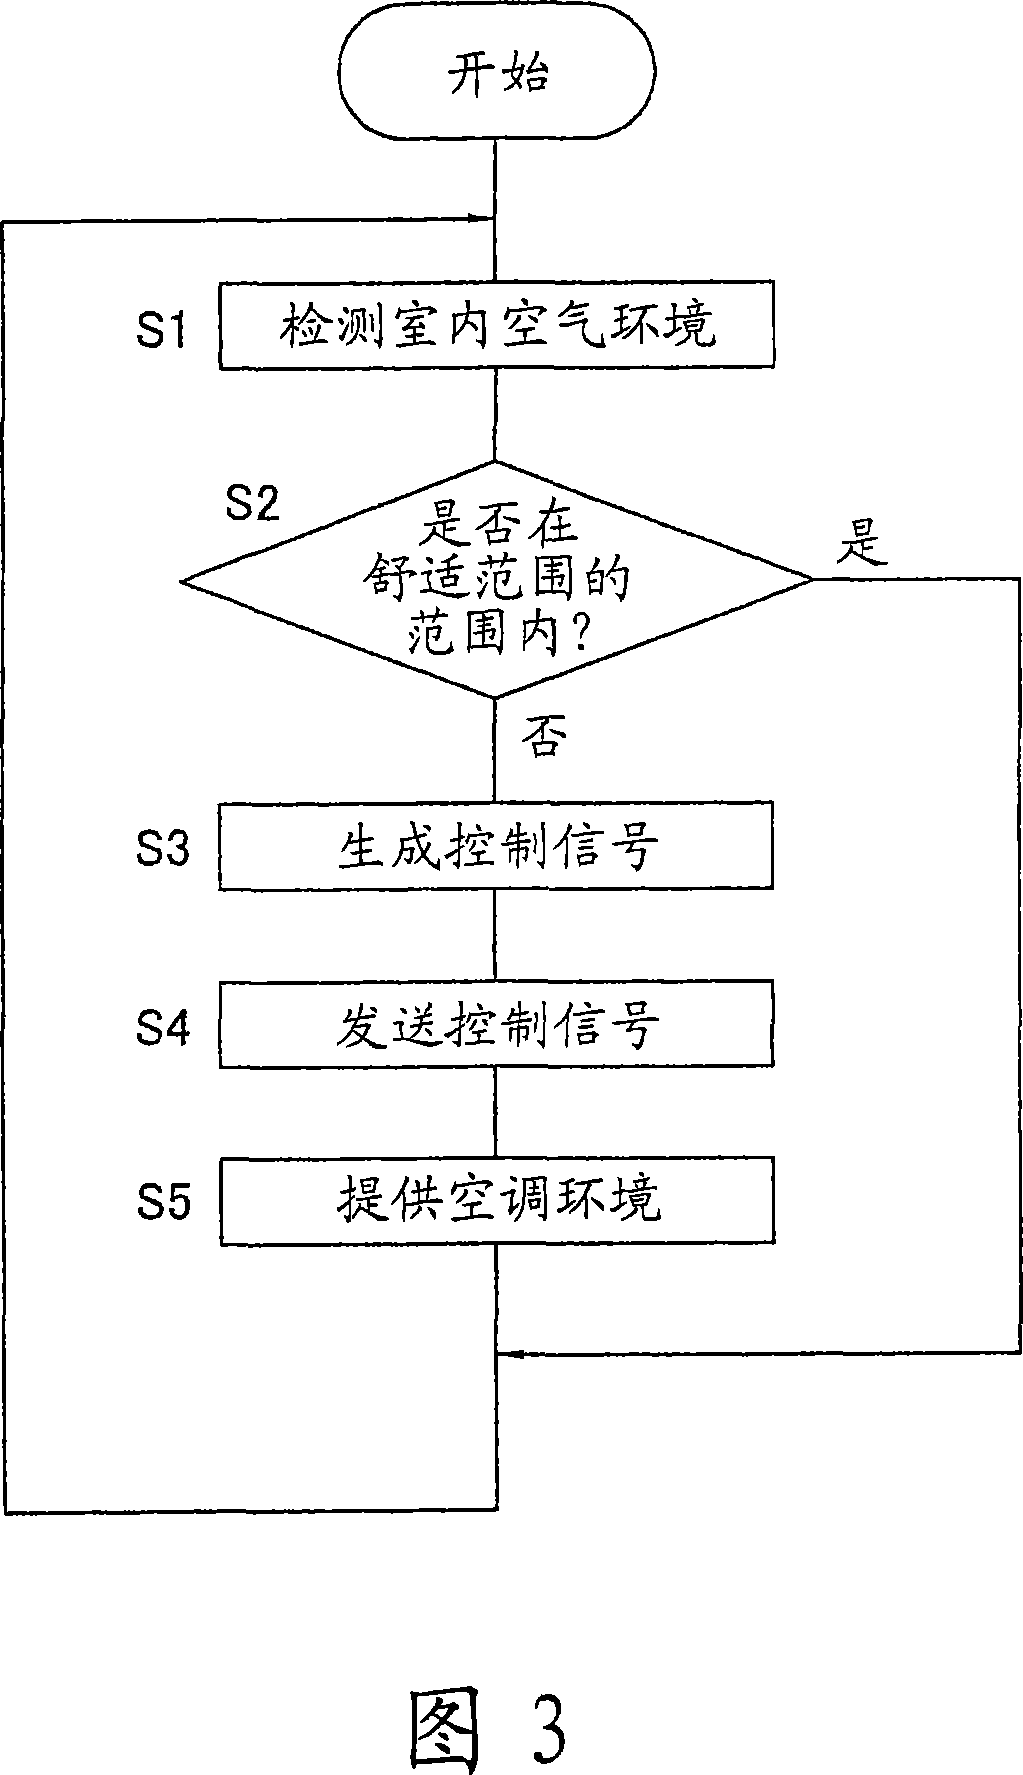 Environment navigation device and program, system and method